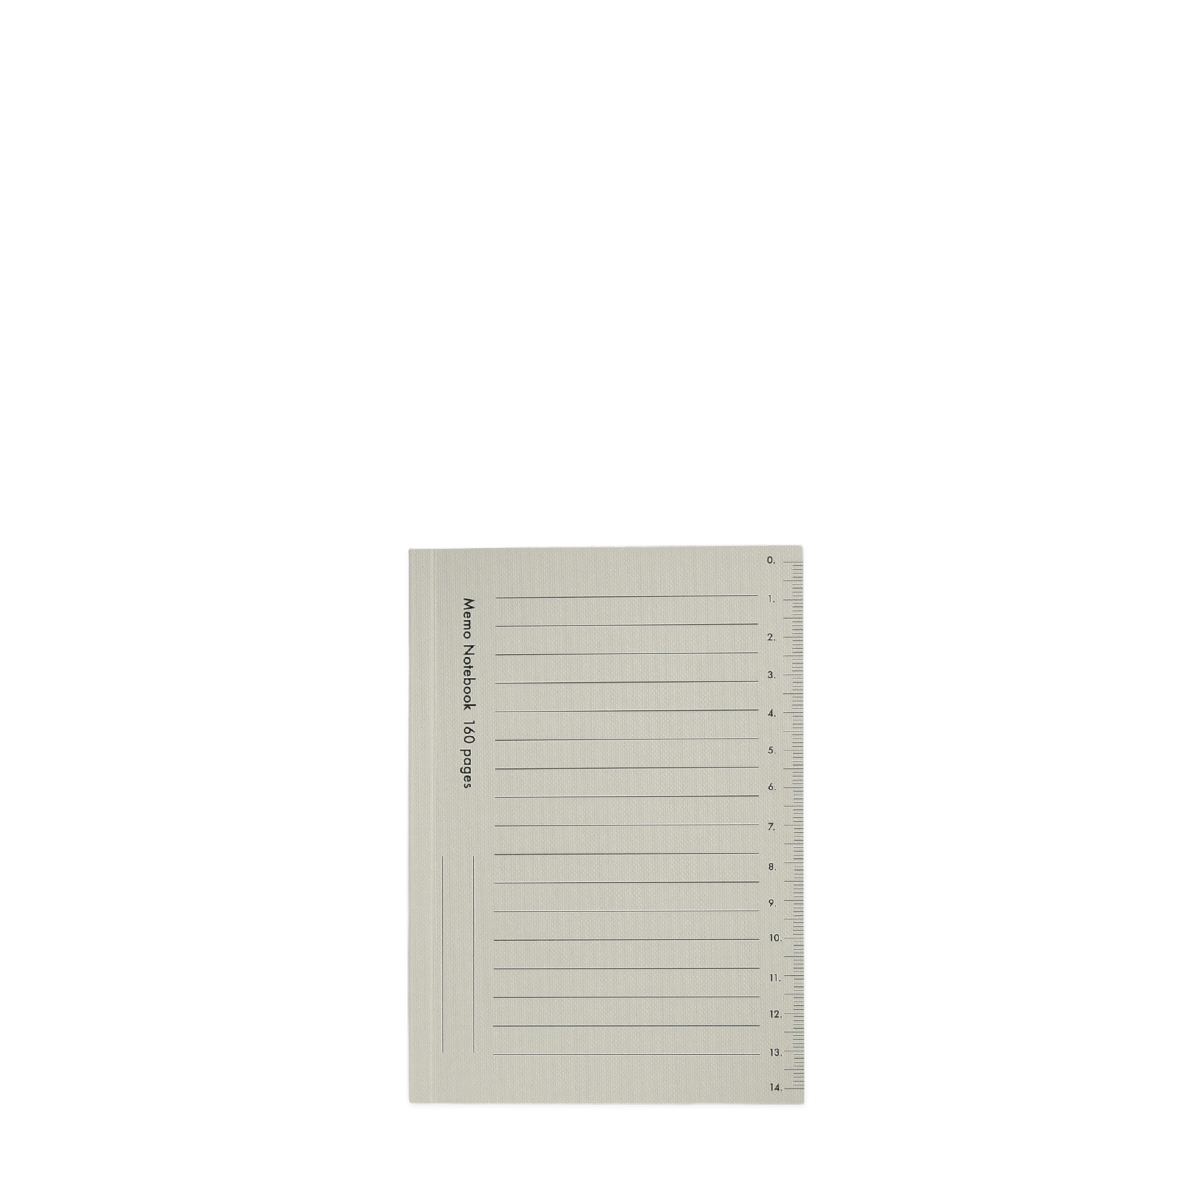 SCOUT EDITIONS - A6 MEMO NOTEBOOK WITH POCKET